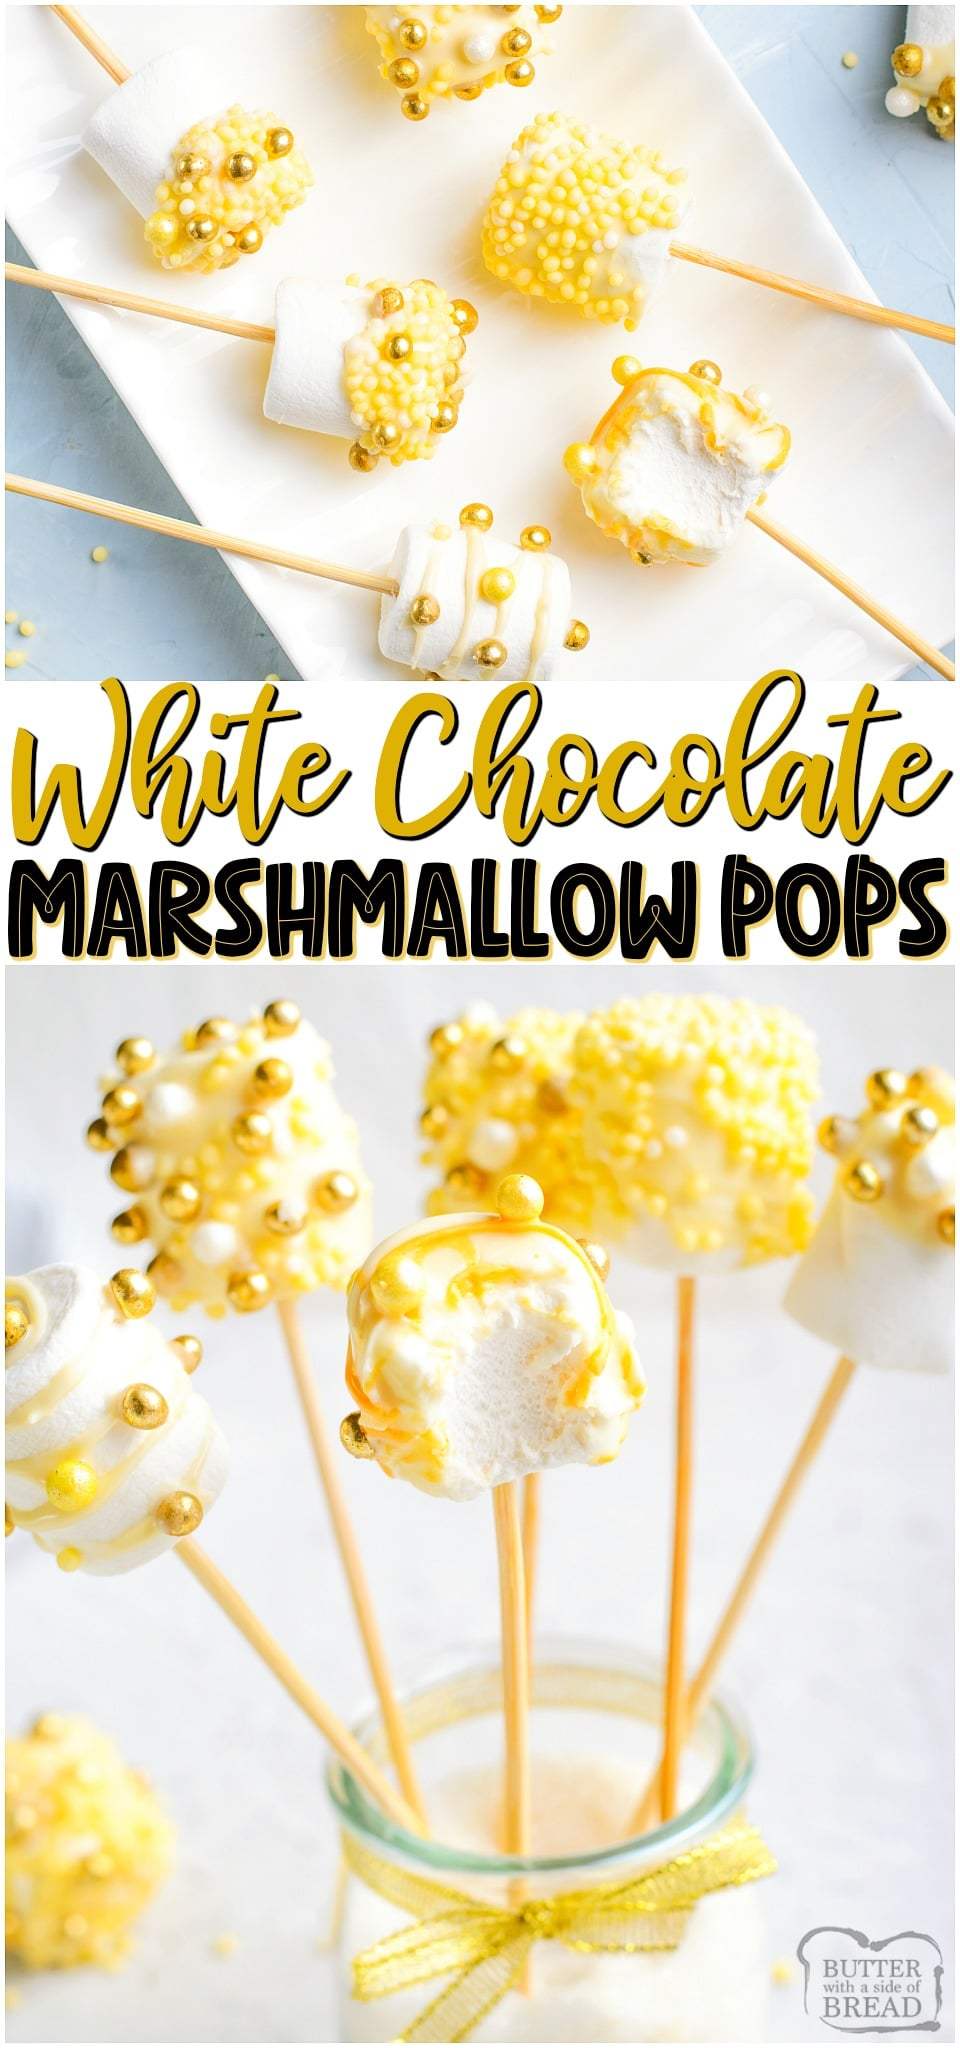 White Chocolate Covered Marshmallow Pops made with gold sprinkles for a simple, festive New Year's treat! Easy recipe for festive chocolate dipped marshmallows! #marshmallows #pops #whitechocolate #newyears #easyrecipe #dessert from BUTTER WITH A SIDE OF BREAD